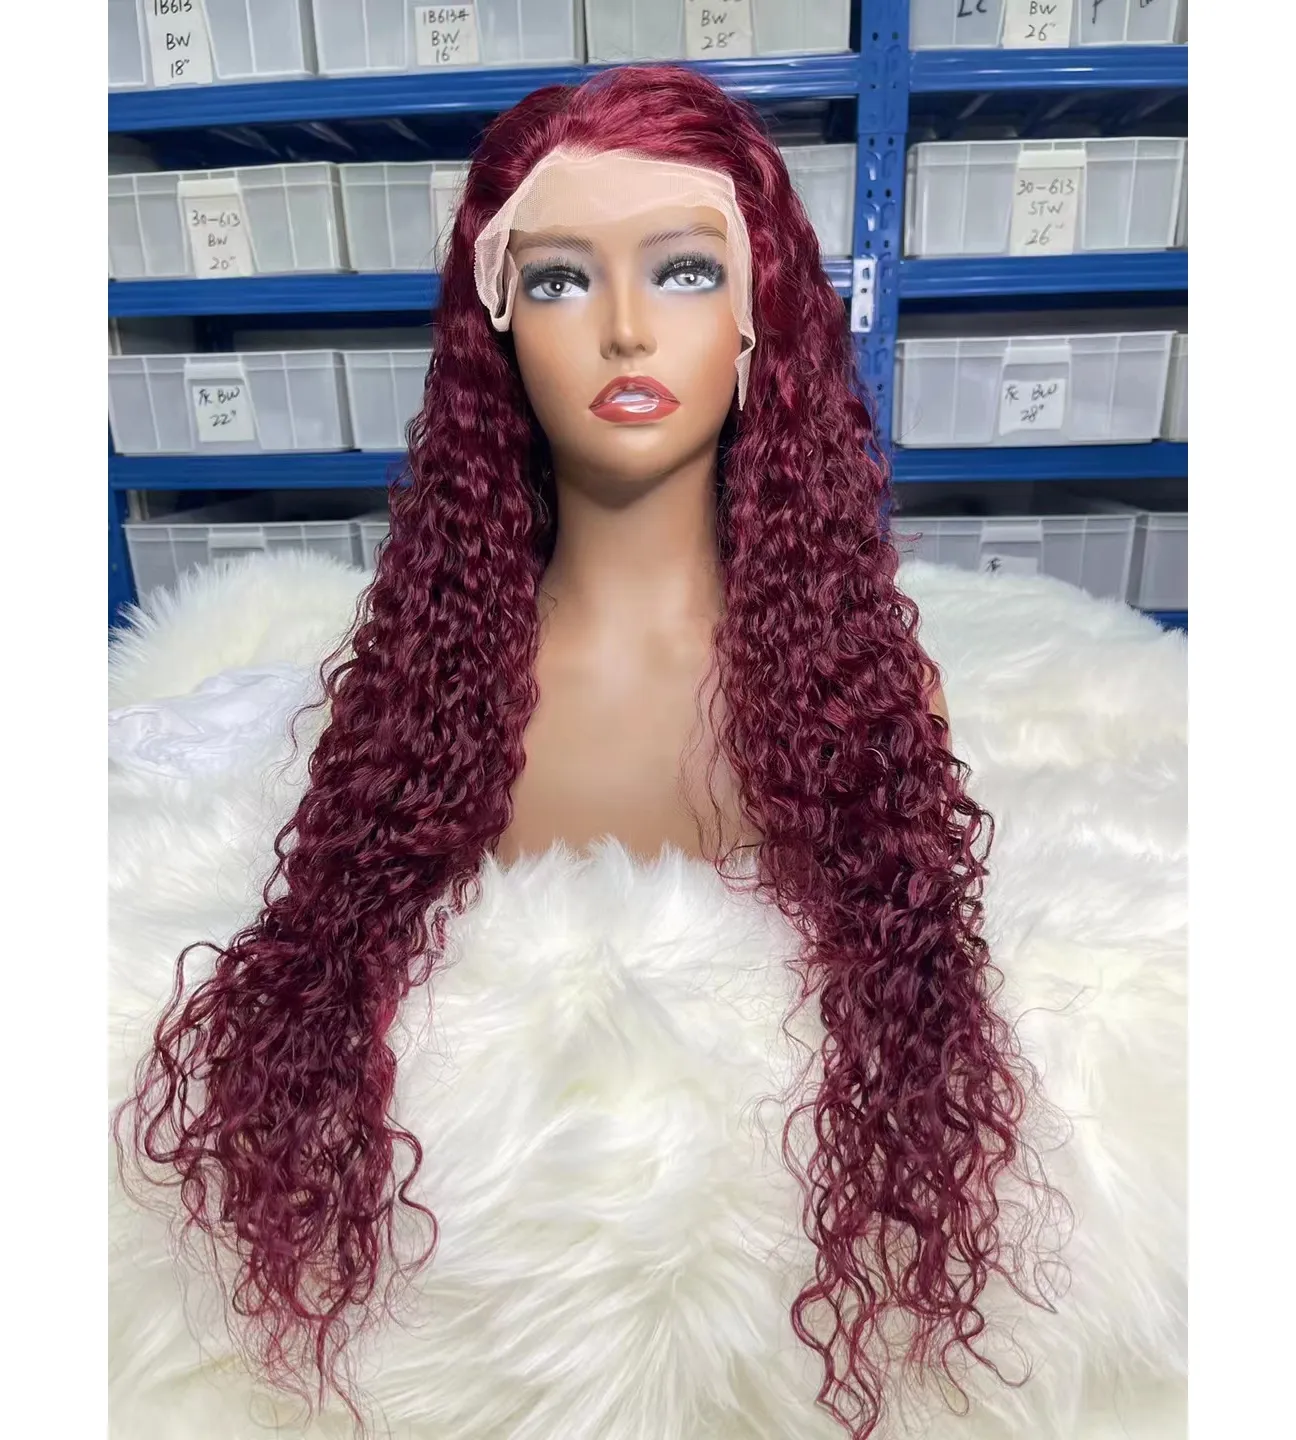 Water wave curly hair color 99j lace front wigs 100% human hair lace front wig for women